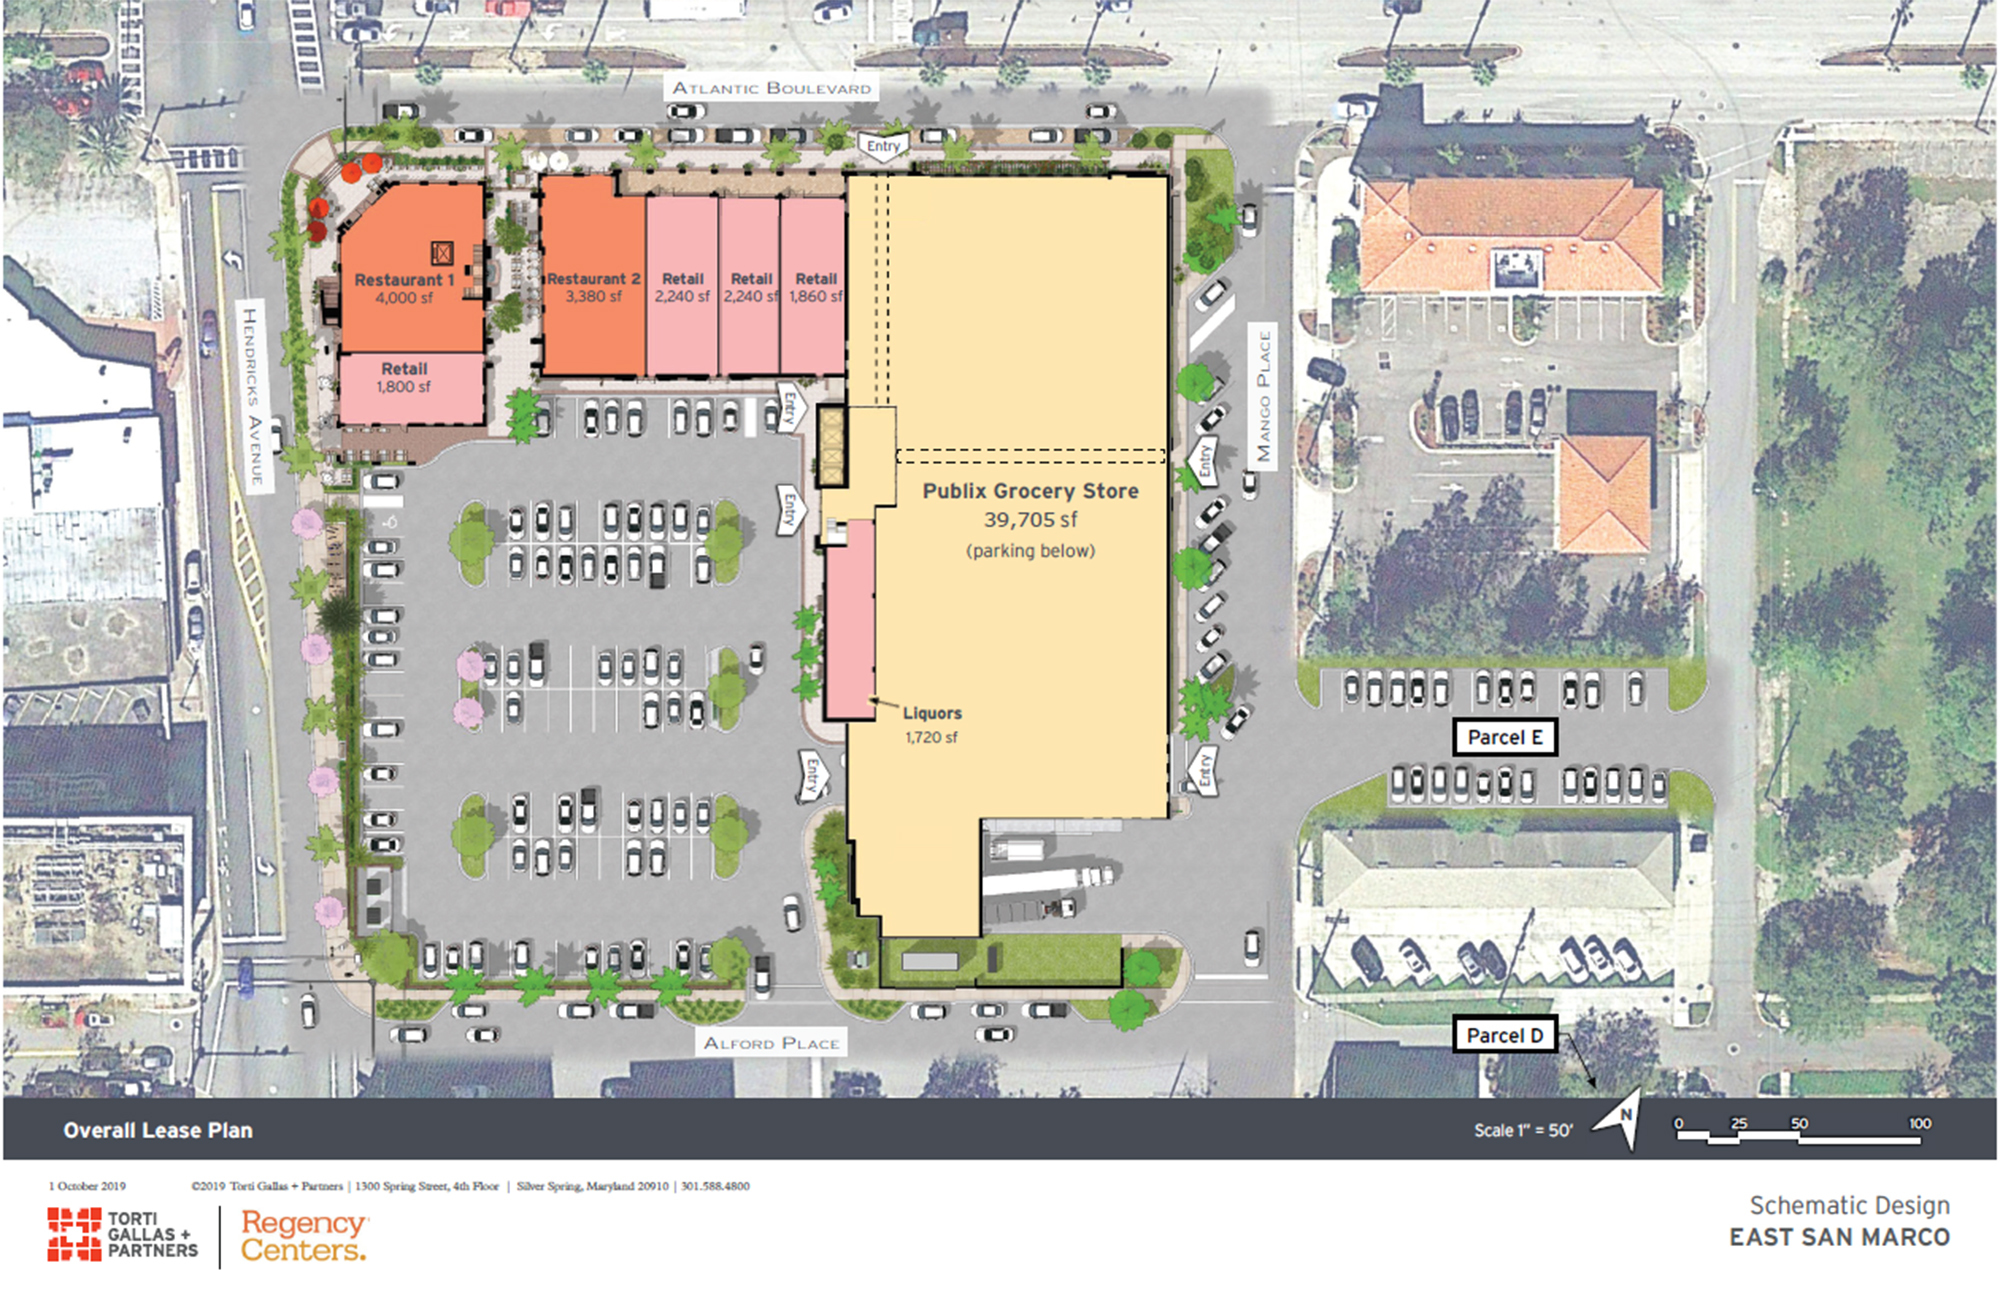 The site plan for the East San Marco shopping center.